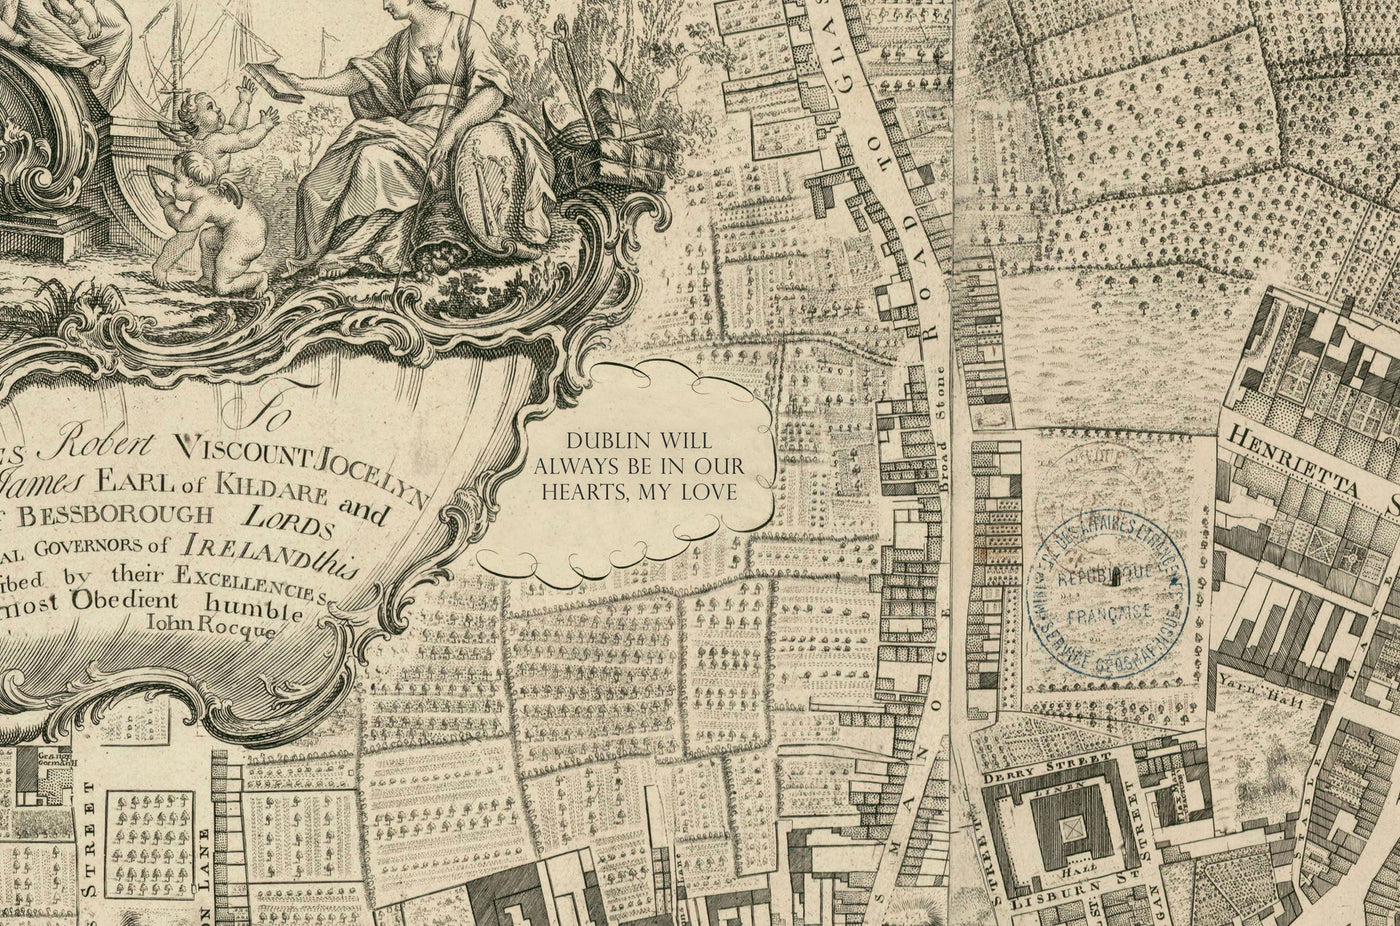 Old Map of Dublin, Ireland in 1756 by John Rocque